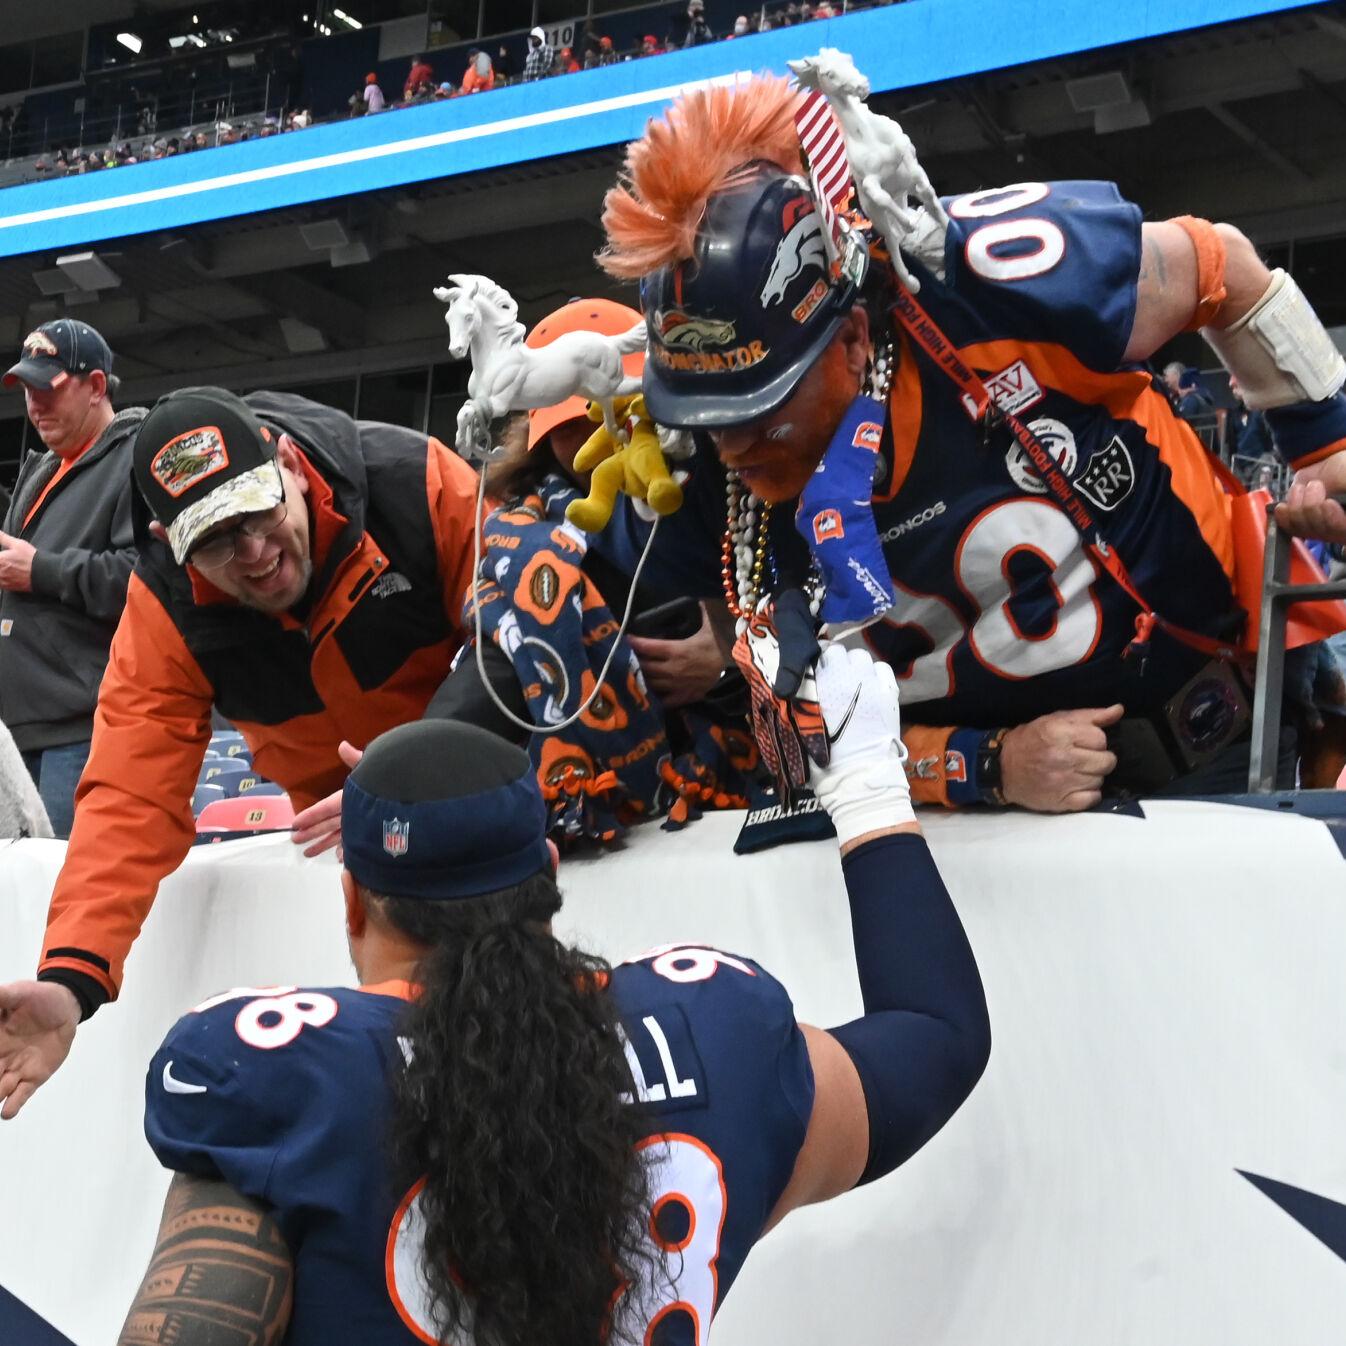 broncos single game tickets on sale